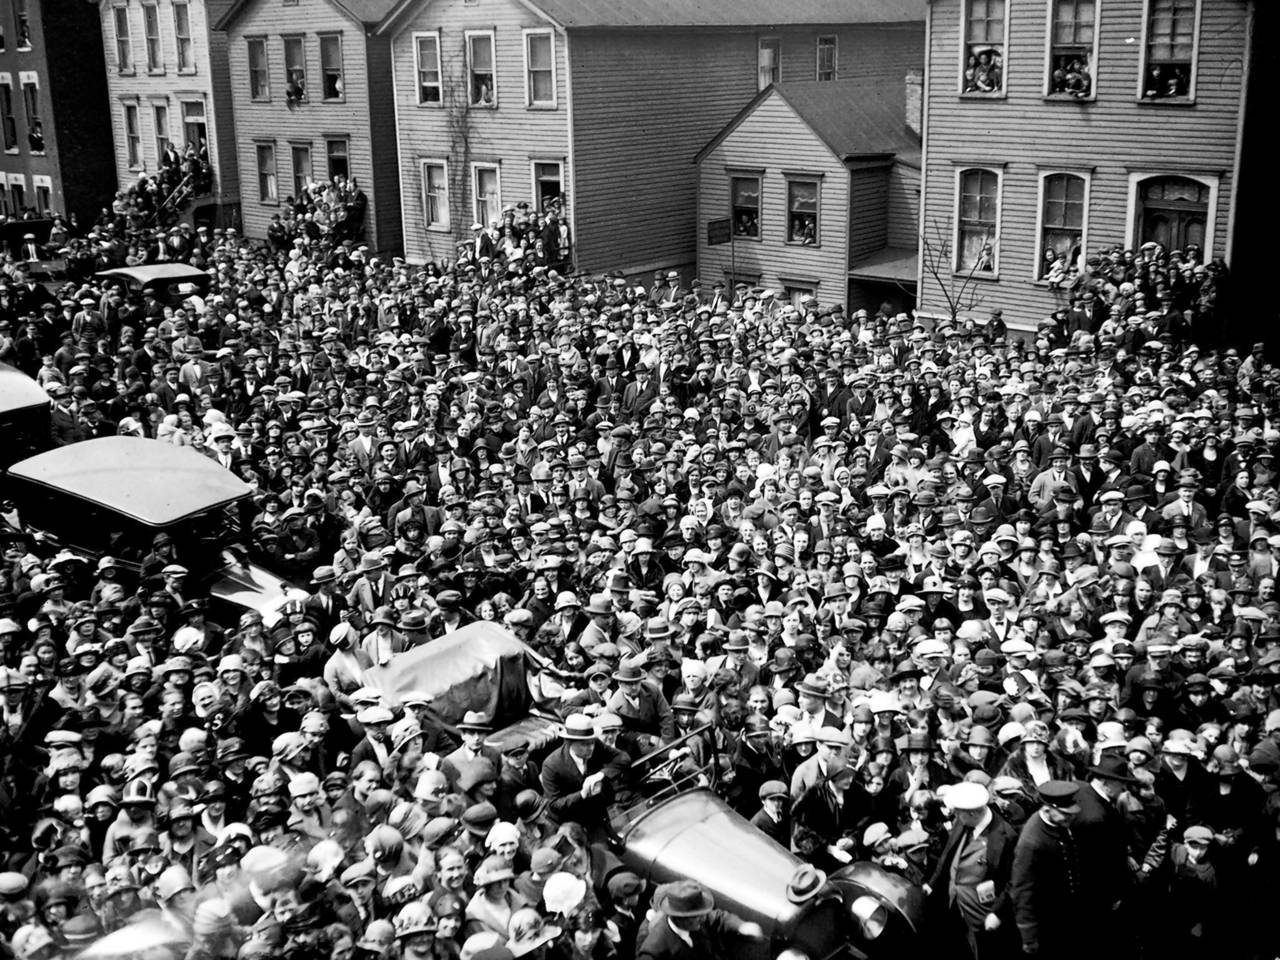 On April 28 and 29, 1924, thousands of curious onlookers mobbed the family home at 1505 W. Augusta Street for the wake and funeral for Wanda Stopa, 24. The crowds gathered in hopes of getting a glimpse of the once promising, young Polish girl who took her own life in a tragic ending to a multifaceted love affair.